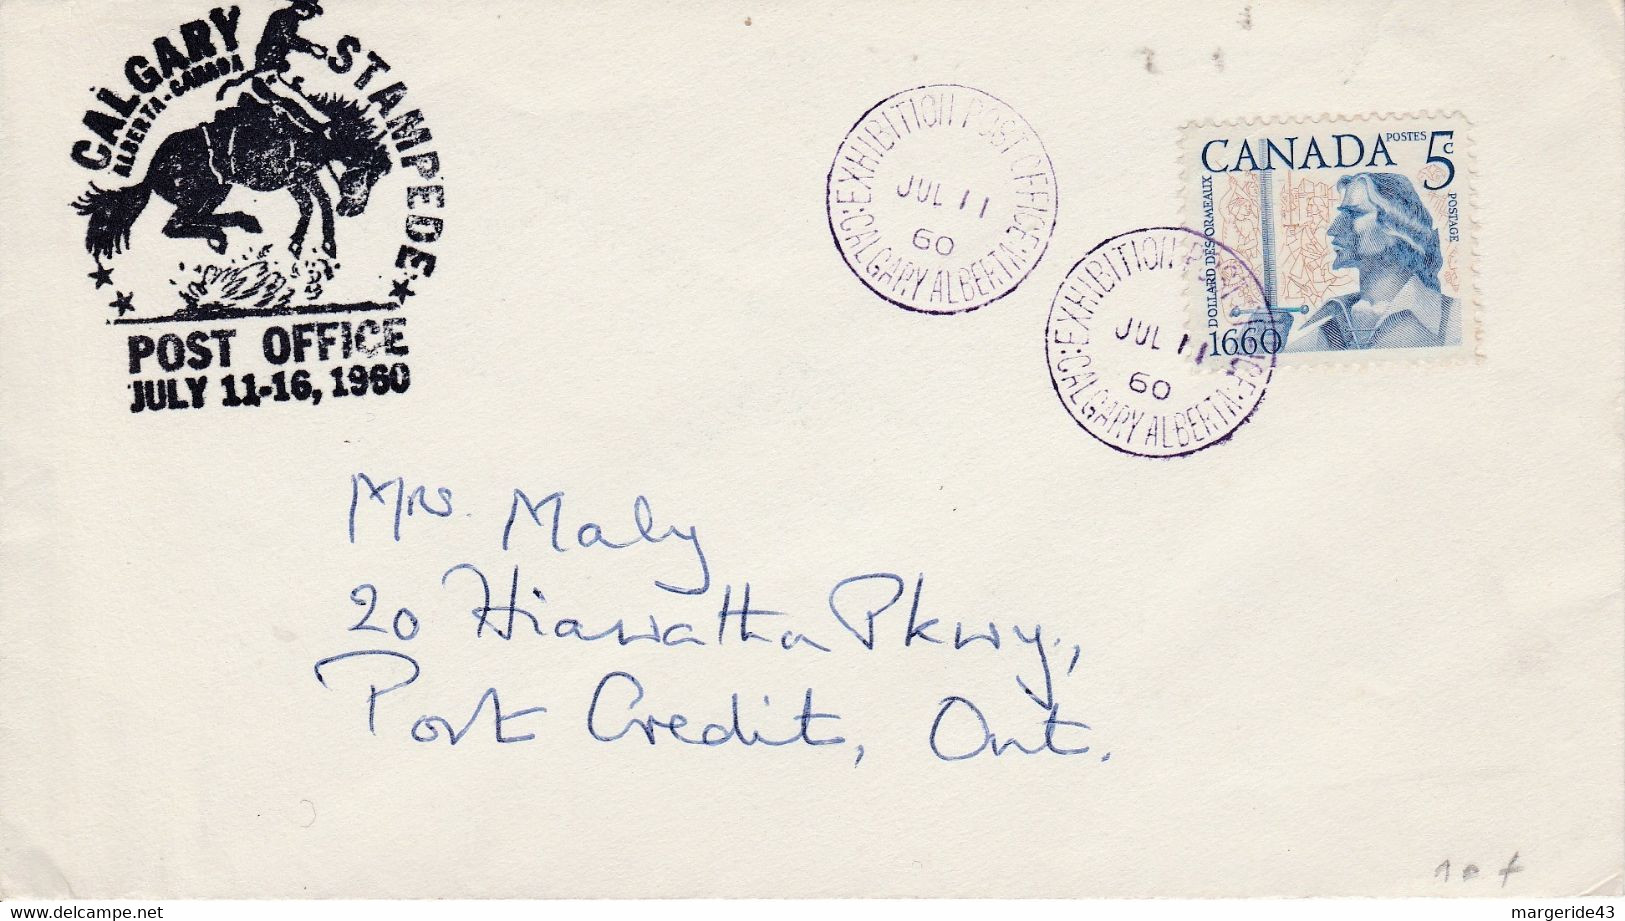 CANADA LETTRE EXHIBITION POST OFFICE CALGARY STAMPEDE 1960 - Commemorative Covers